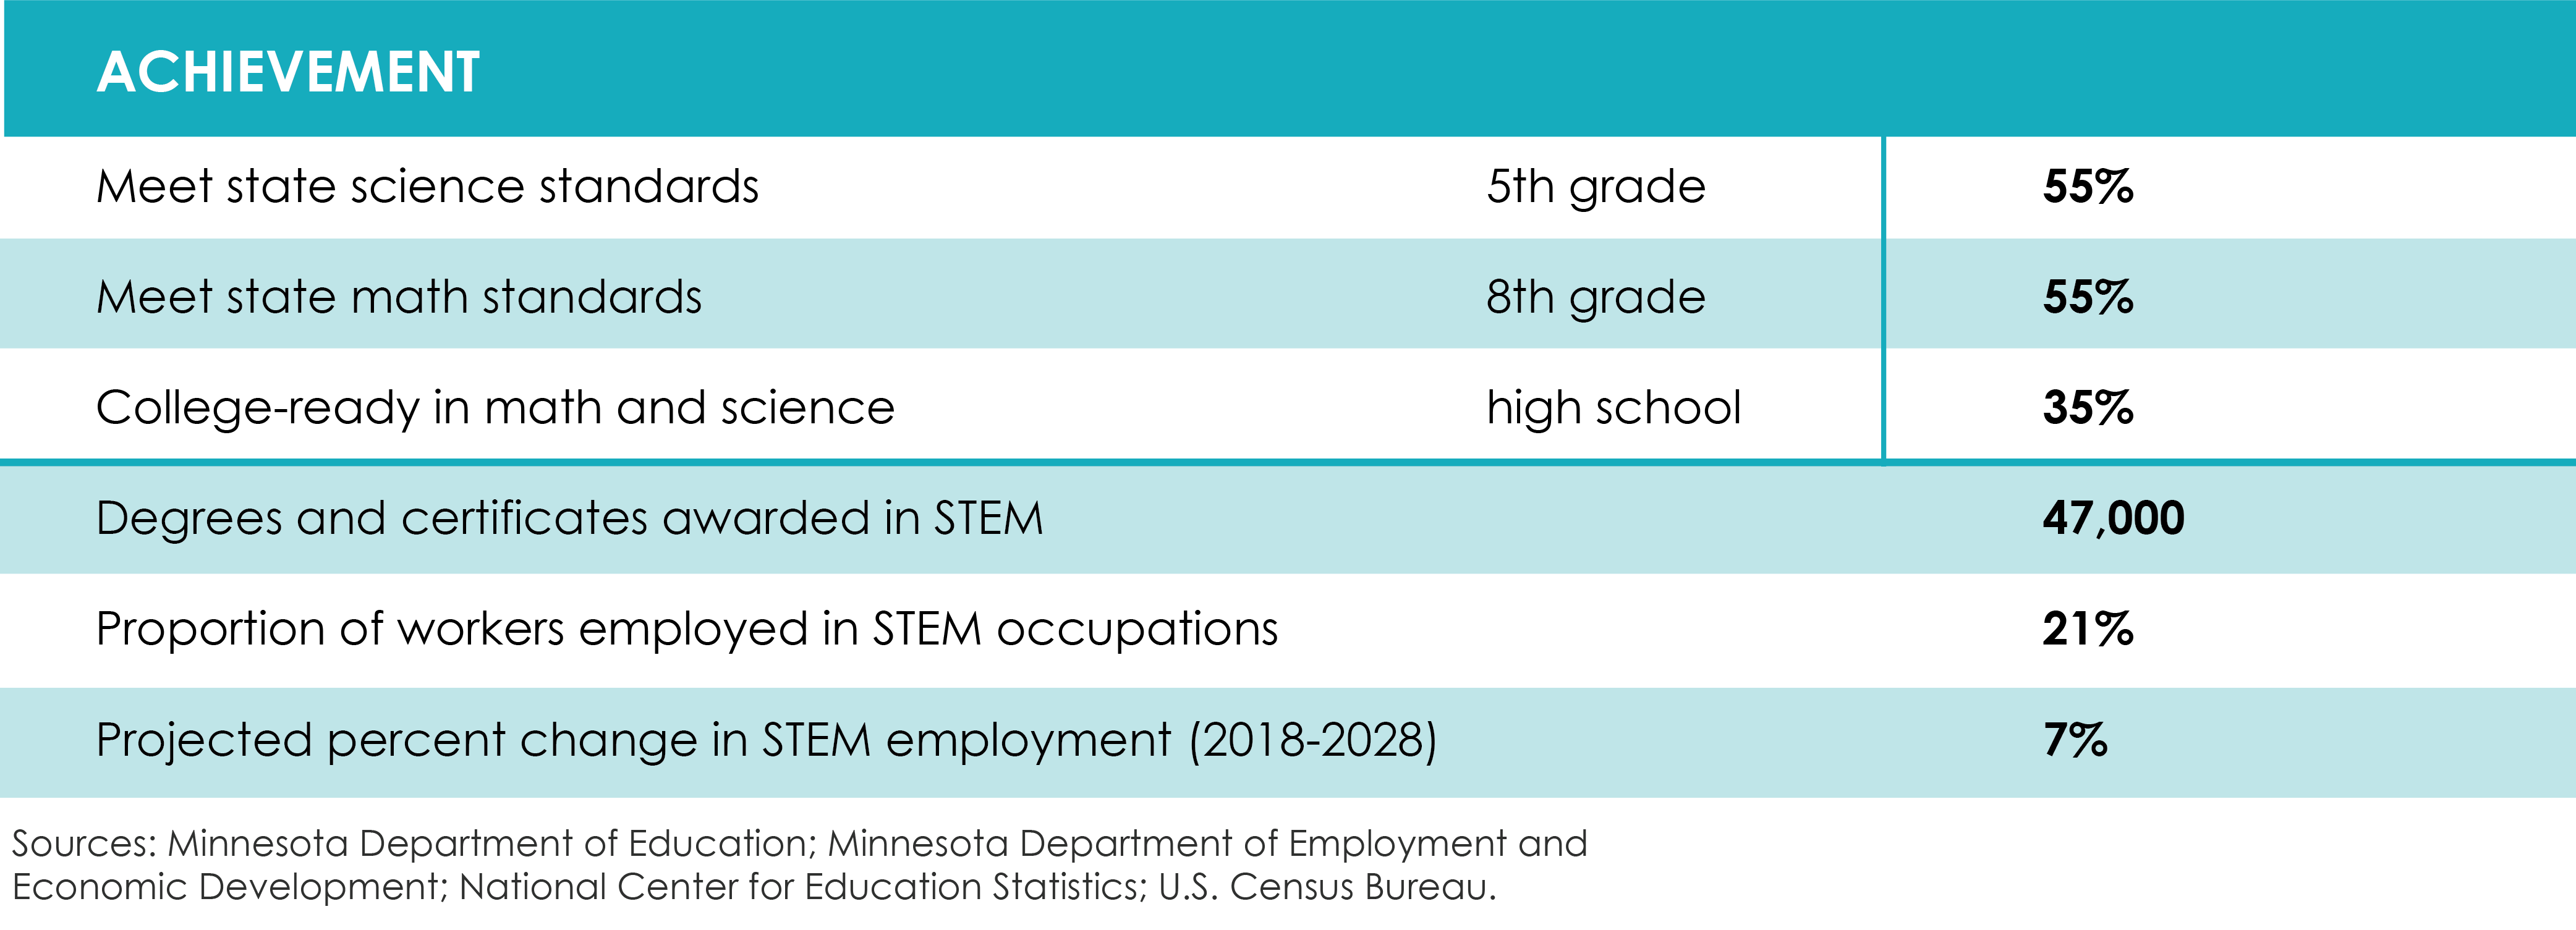 Achievement table with following data: 1. Meet state science standards, 5th grade: 55%, 2. Meet state math standards, 8th grade: 55%, 3. College-ready in math and science, high school: 35%, 4. Degrees and certificates awarded in STEM: 47,000, 5. Proportion of workers employed in STEM occupations: 21%, 6. Projected percent change in STEM employment (2018-2028): 7% 